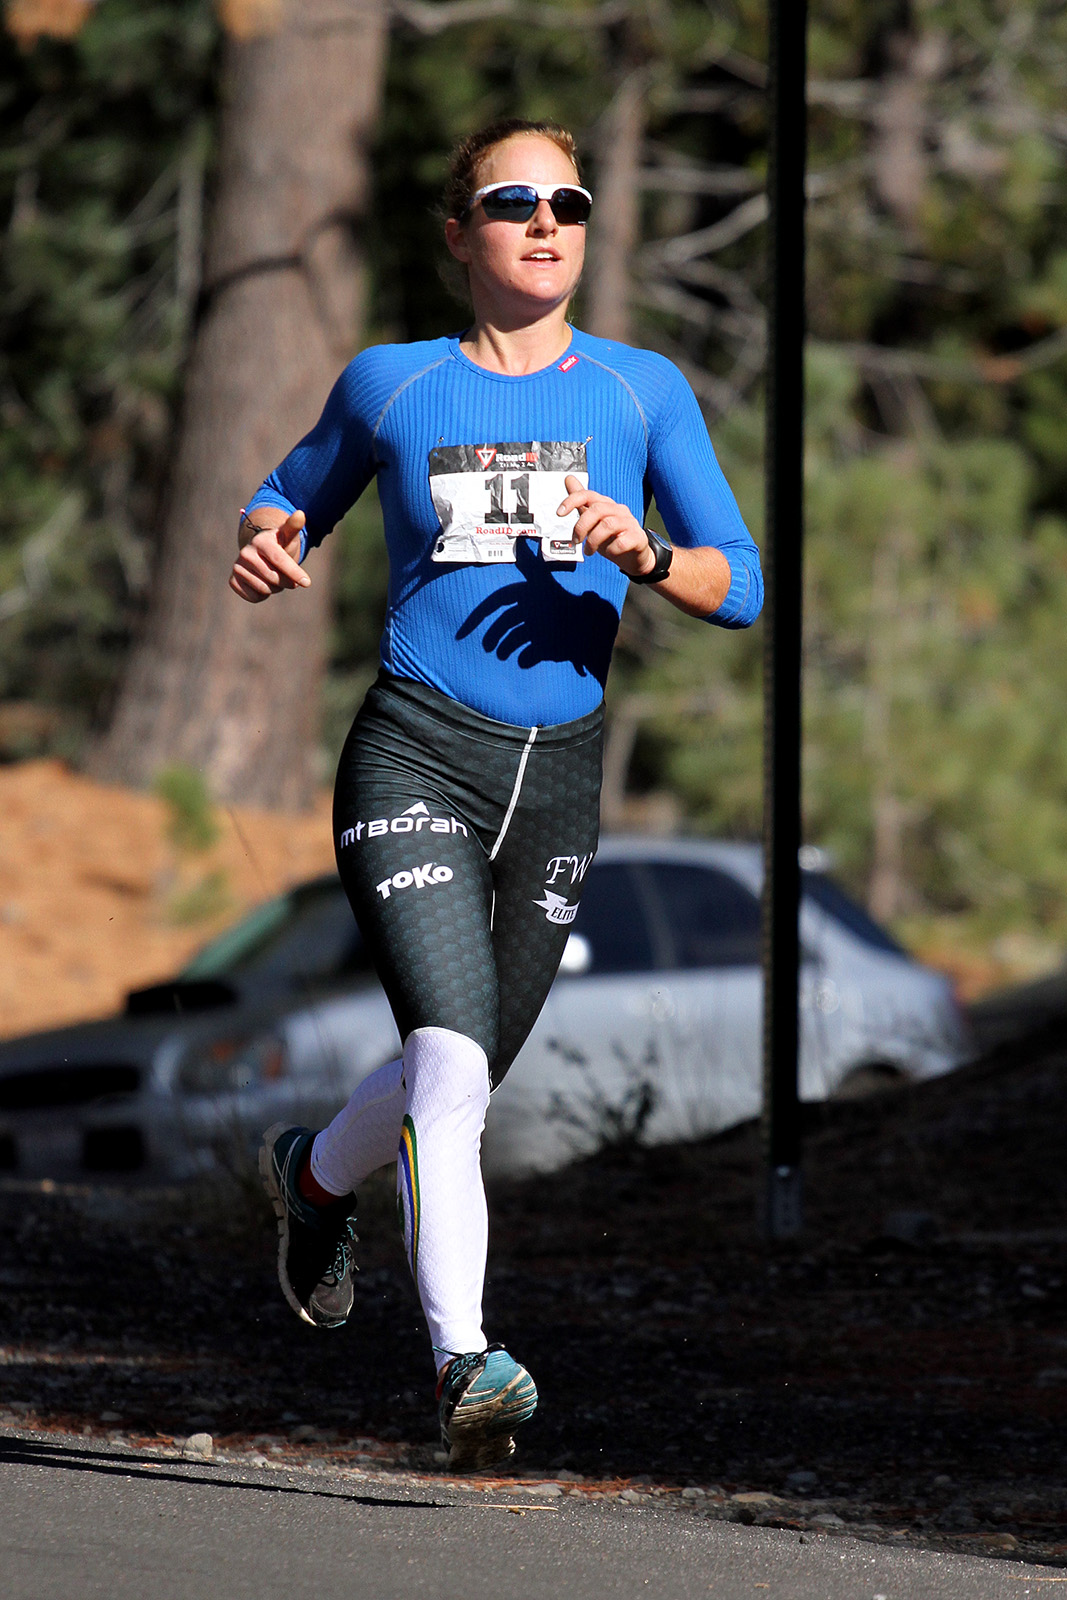 Anja Gruber in the 2014 Donner Turkey Trot. (Photo: Mark Nadell/MacBeth Graphics)